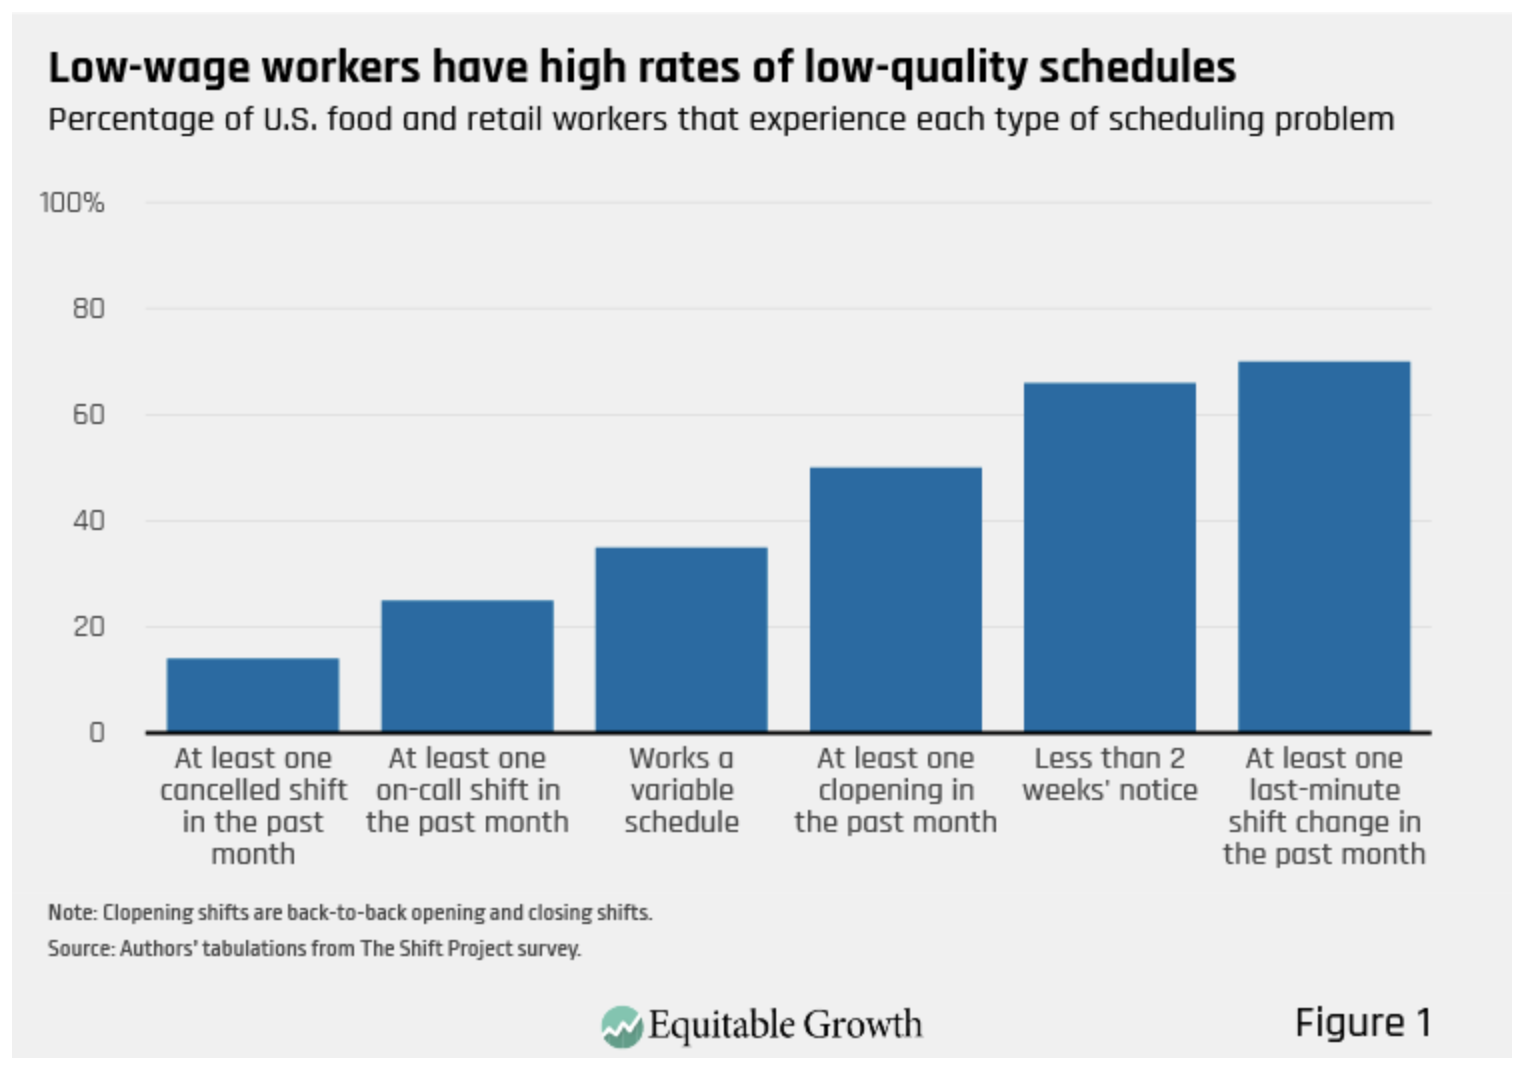 Low quality work schedules for fast food workers hinders vaccinations.